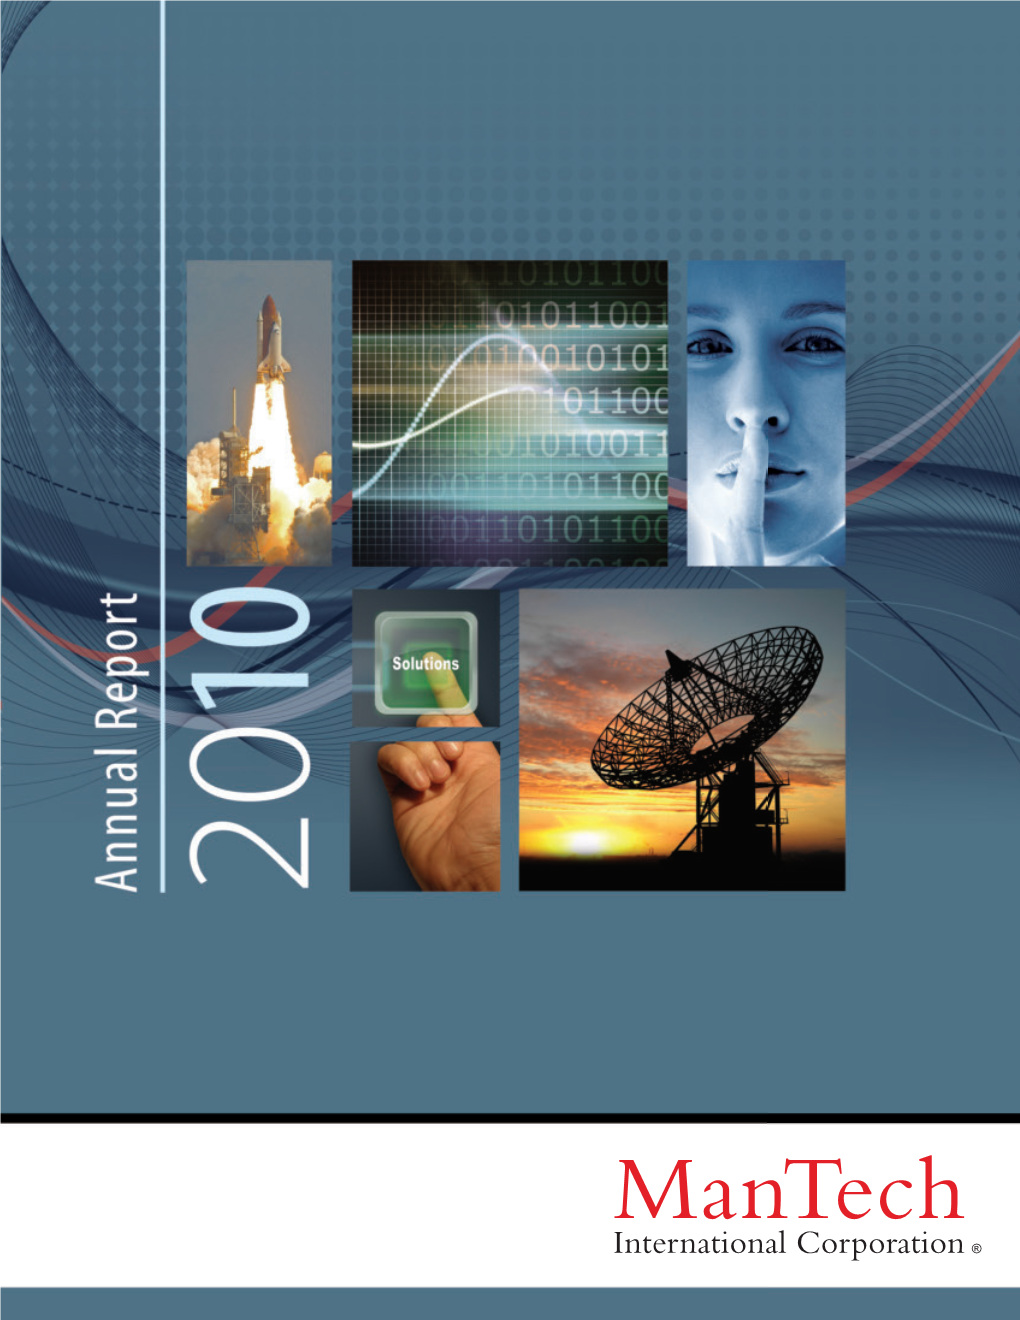 2010 Annual Report Critical C4ISR Support to the U.S